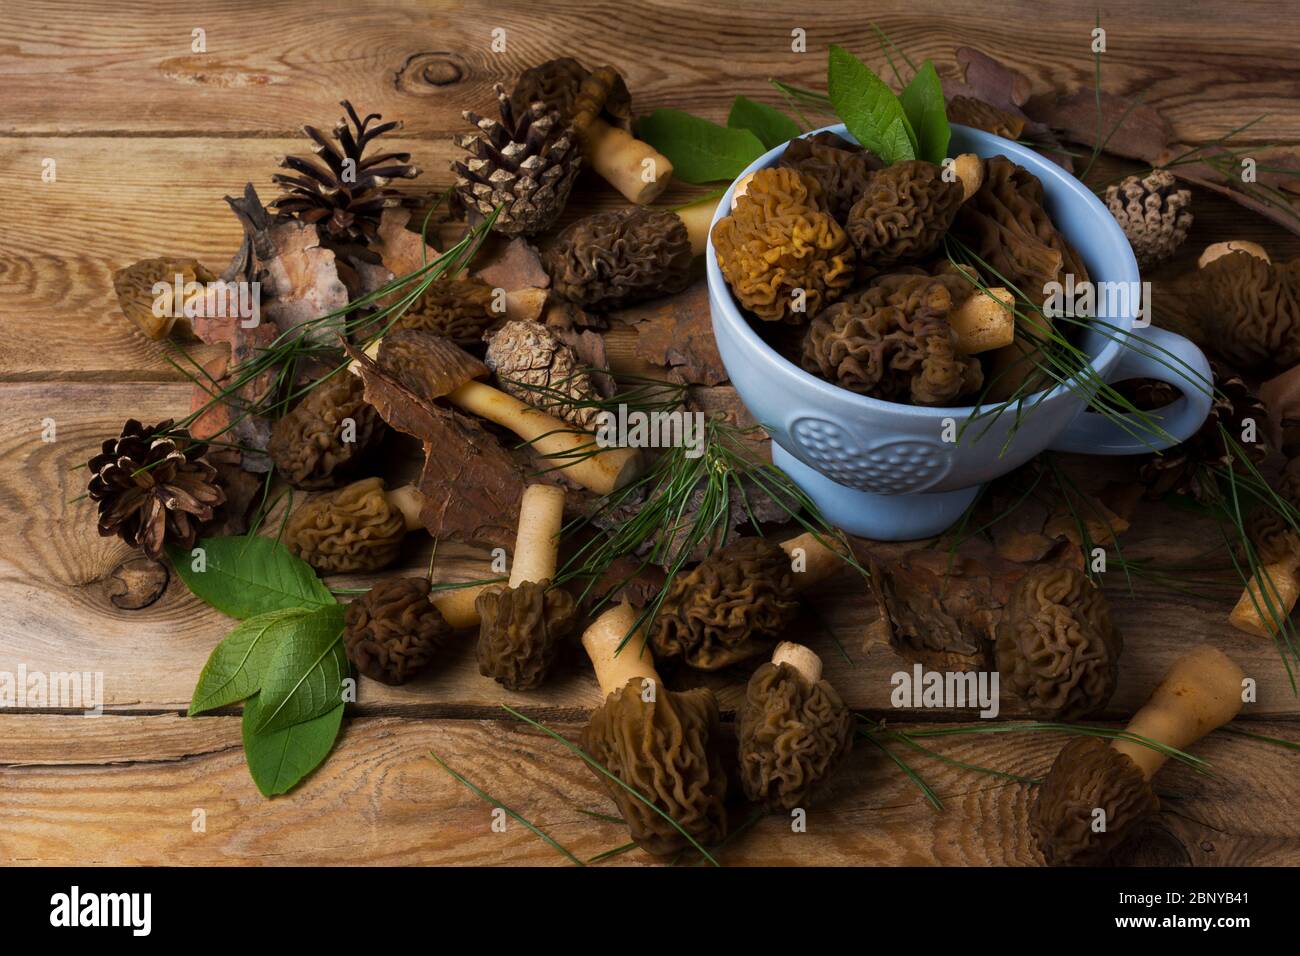 Blue rustic bowl with wild forest picking morel mushrooms on the wooden background. Vegetarian healthy food concept Stock Photo